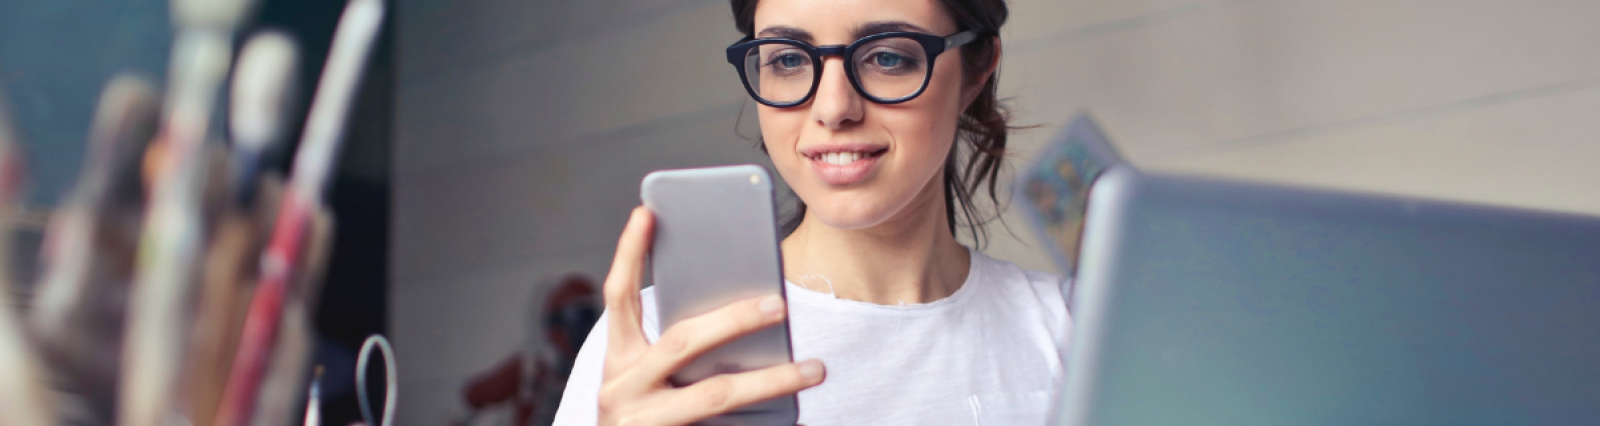 Peoples Pay - Woman with glasses smiling at phone